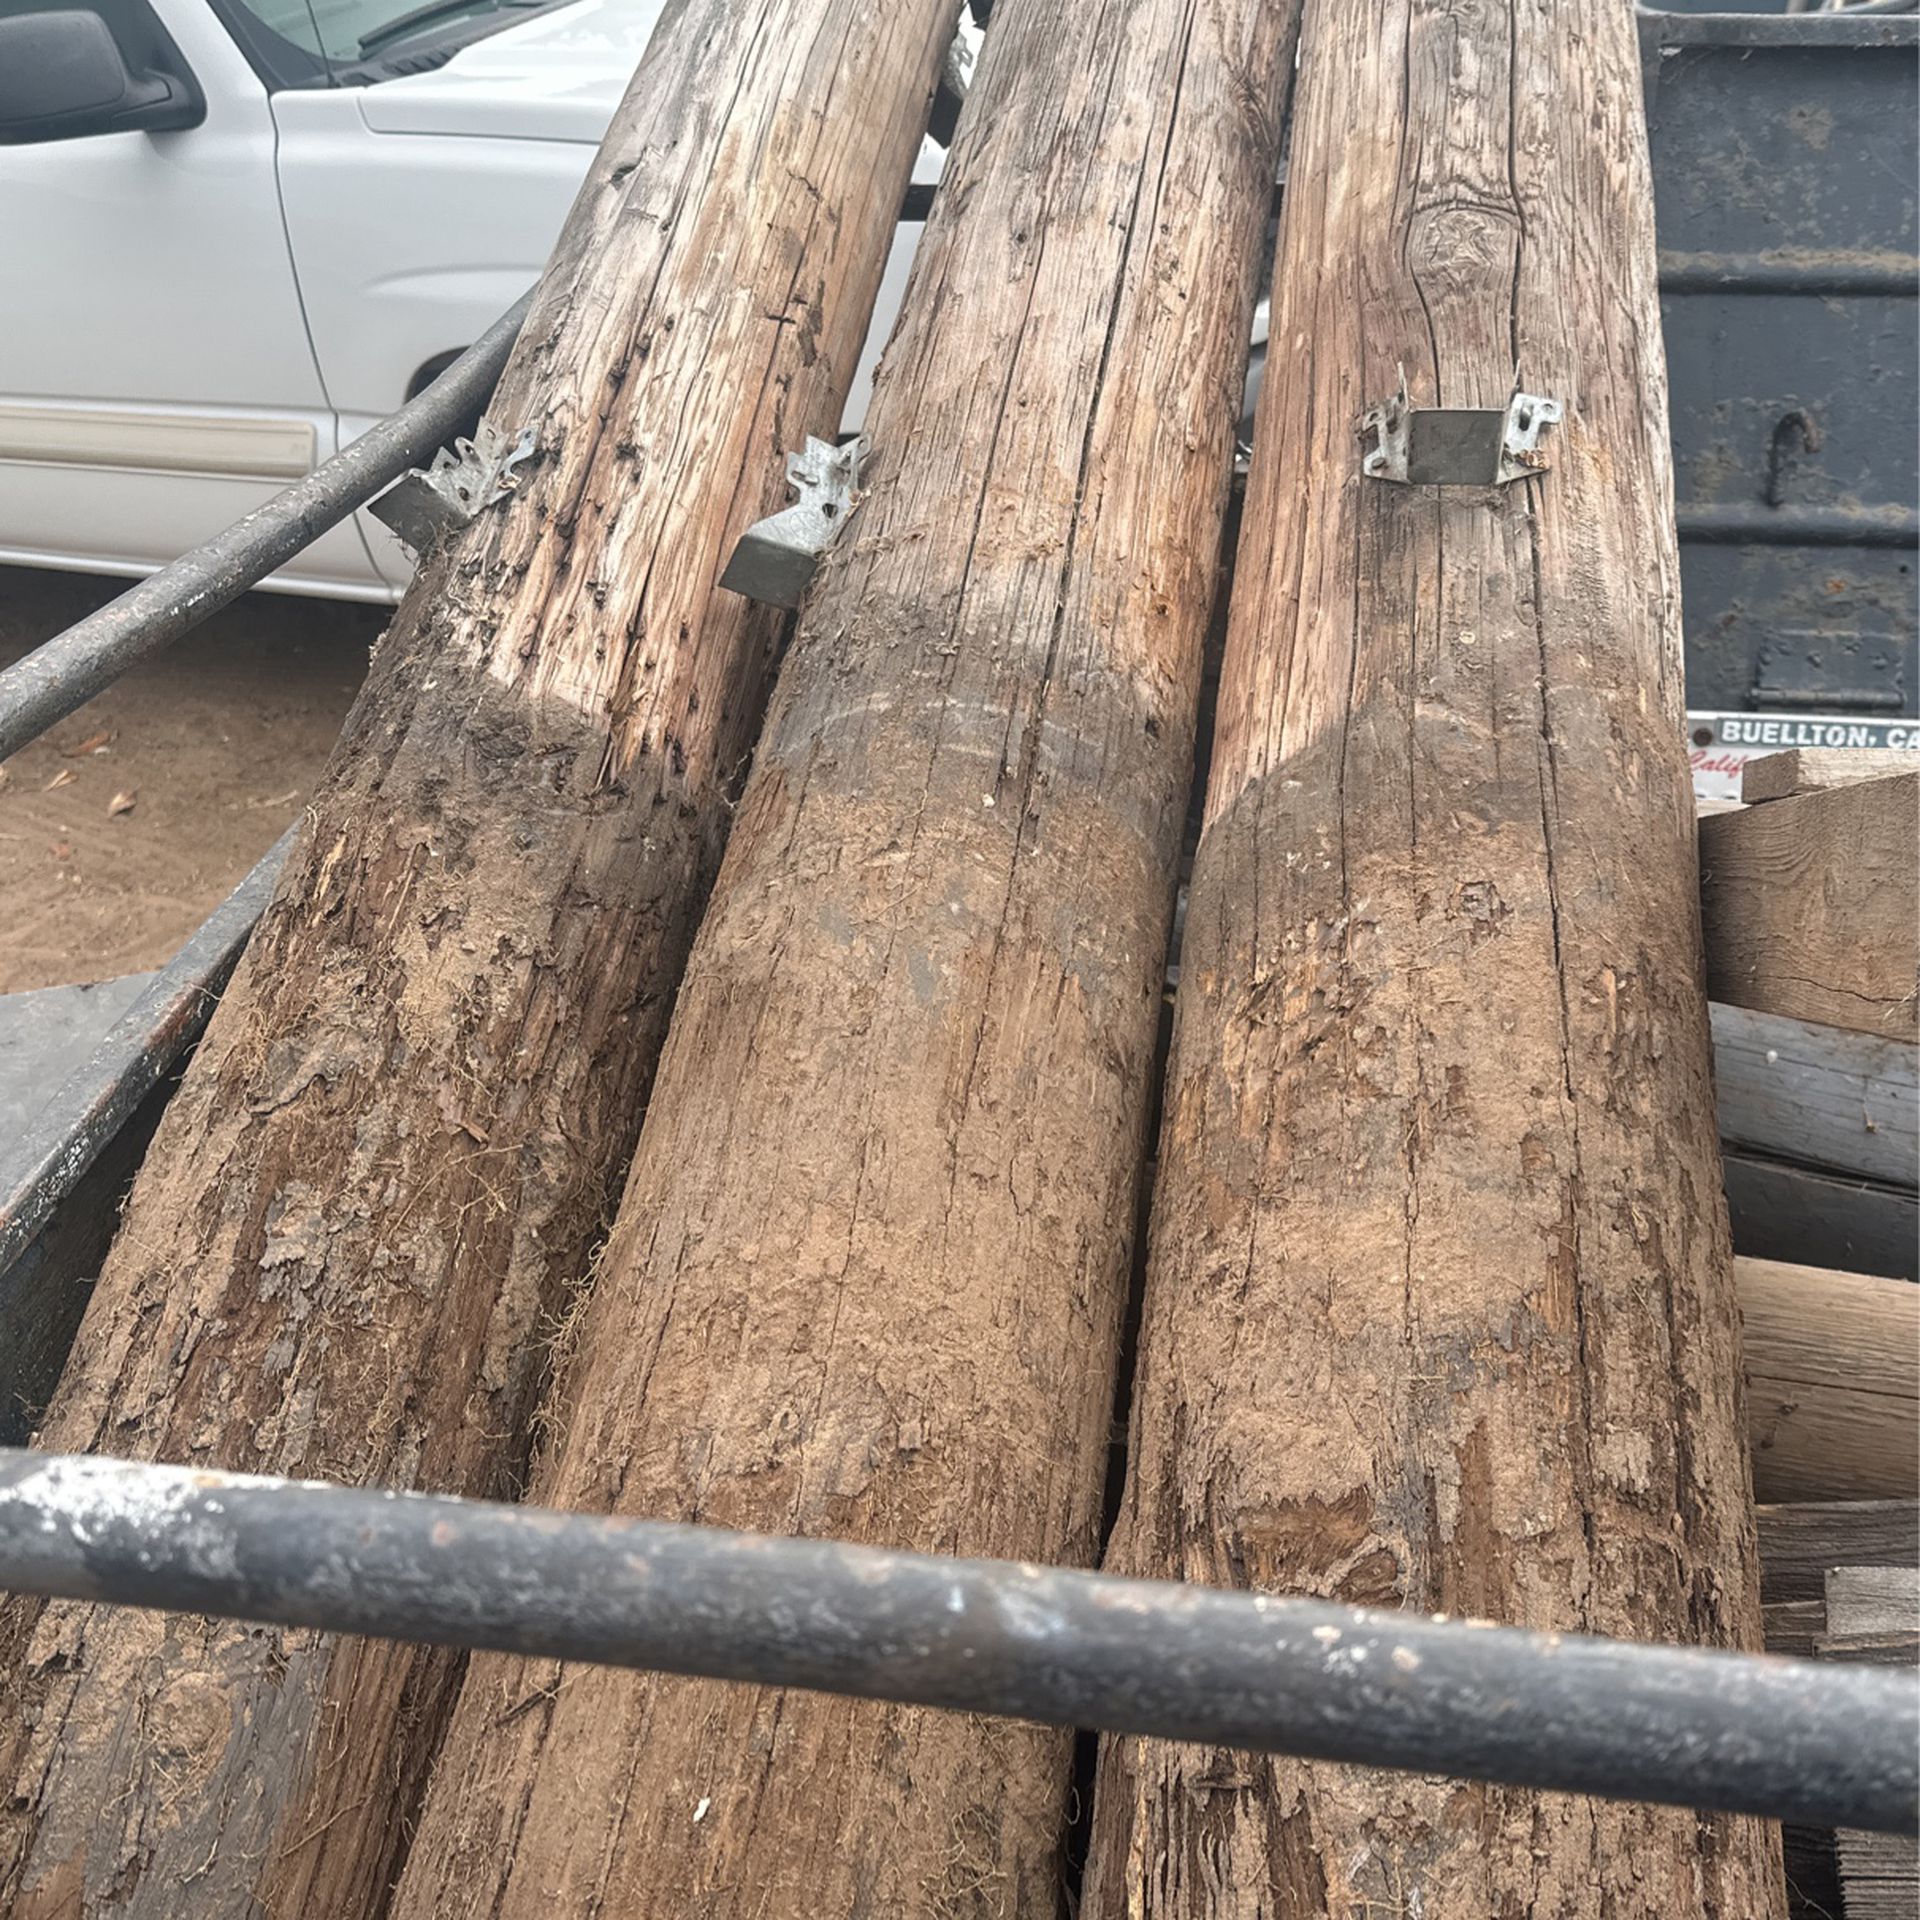  Railroad Ties, And Poles And Fencing